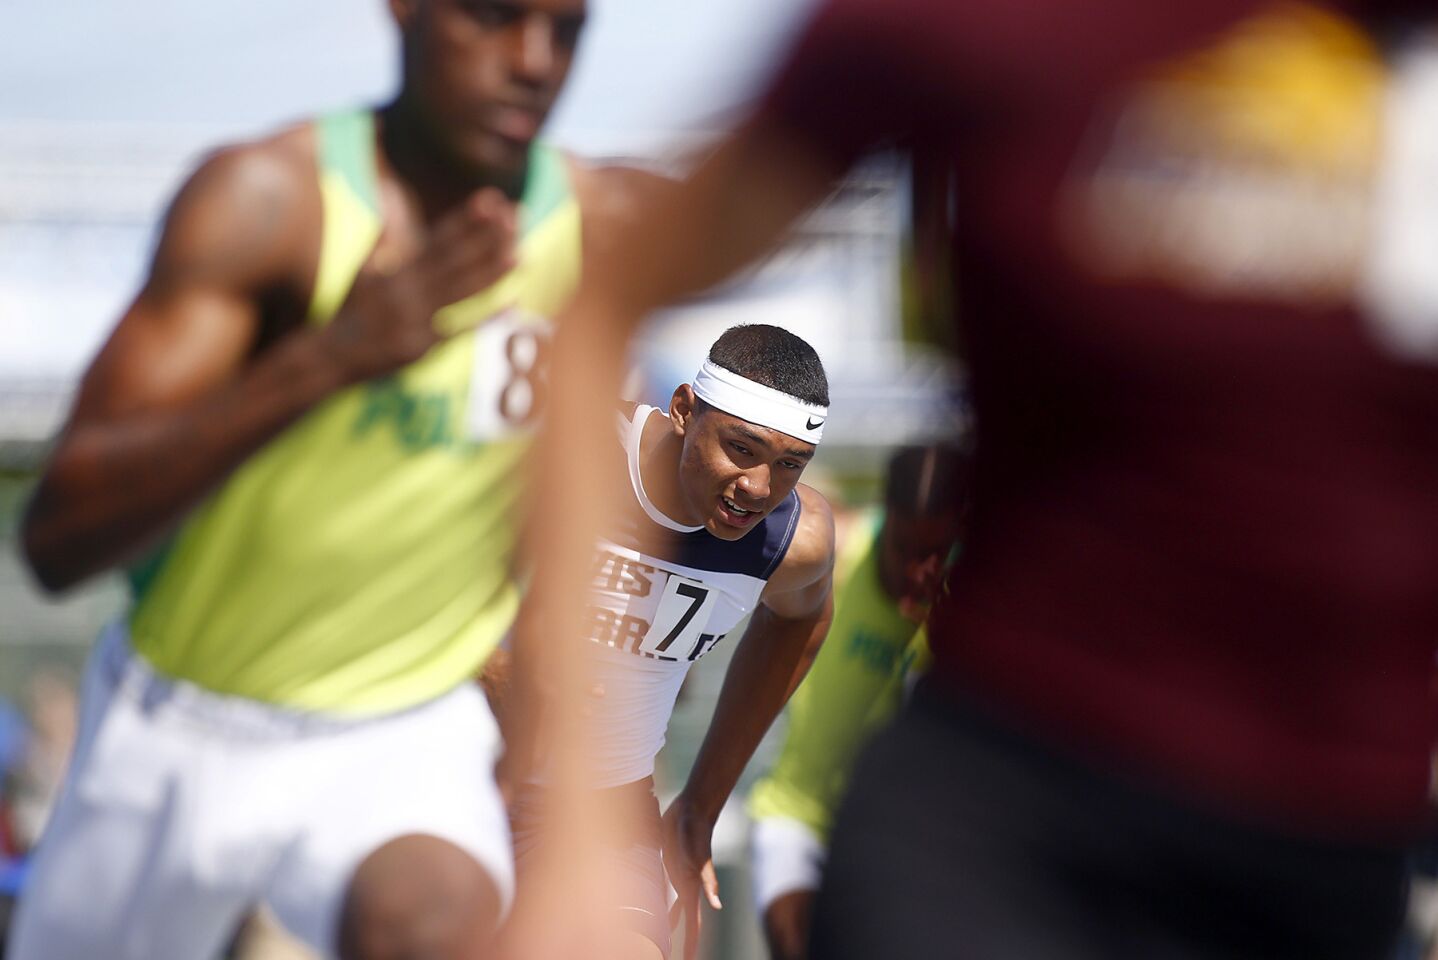 Murietta Vista sprinter Michael Norman gets a fast start in the Division 1 boys' 400-meter dash during the CIF Southern Section Division finals at Cerritos College.